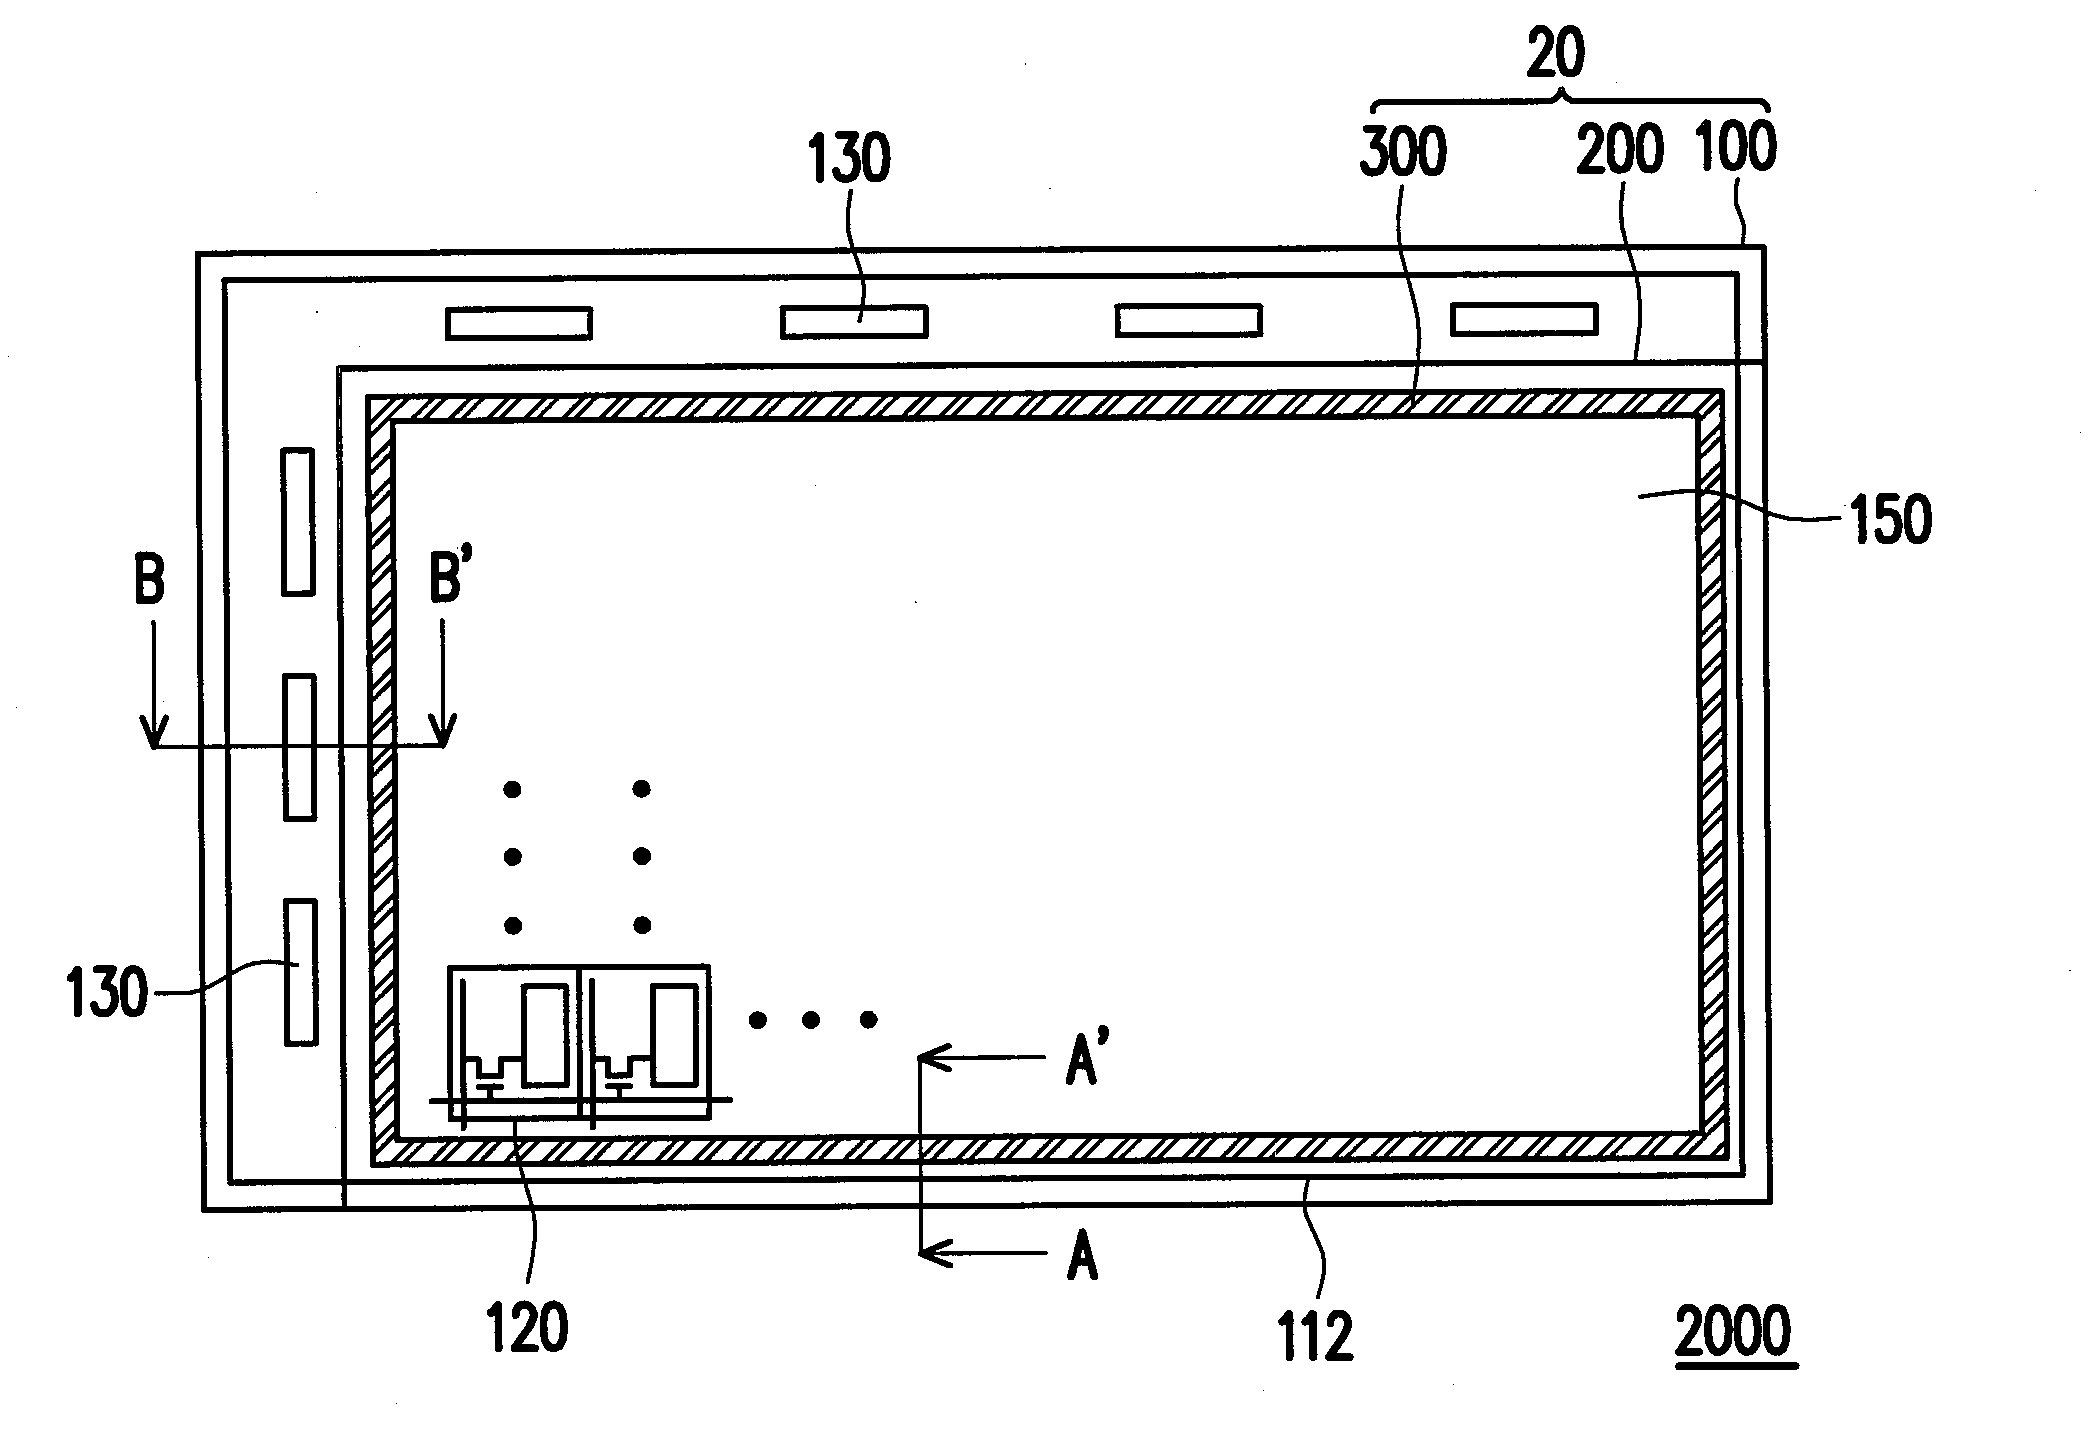 Substrate module